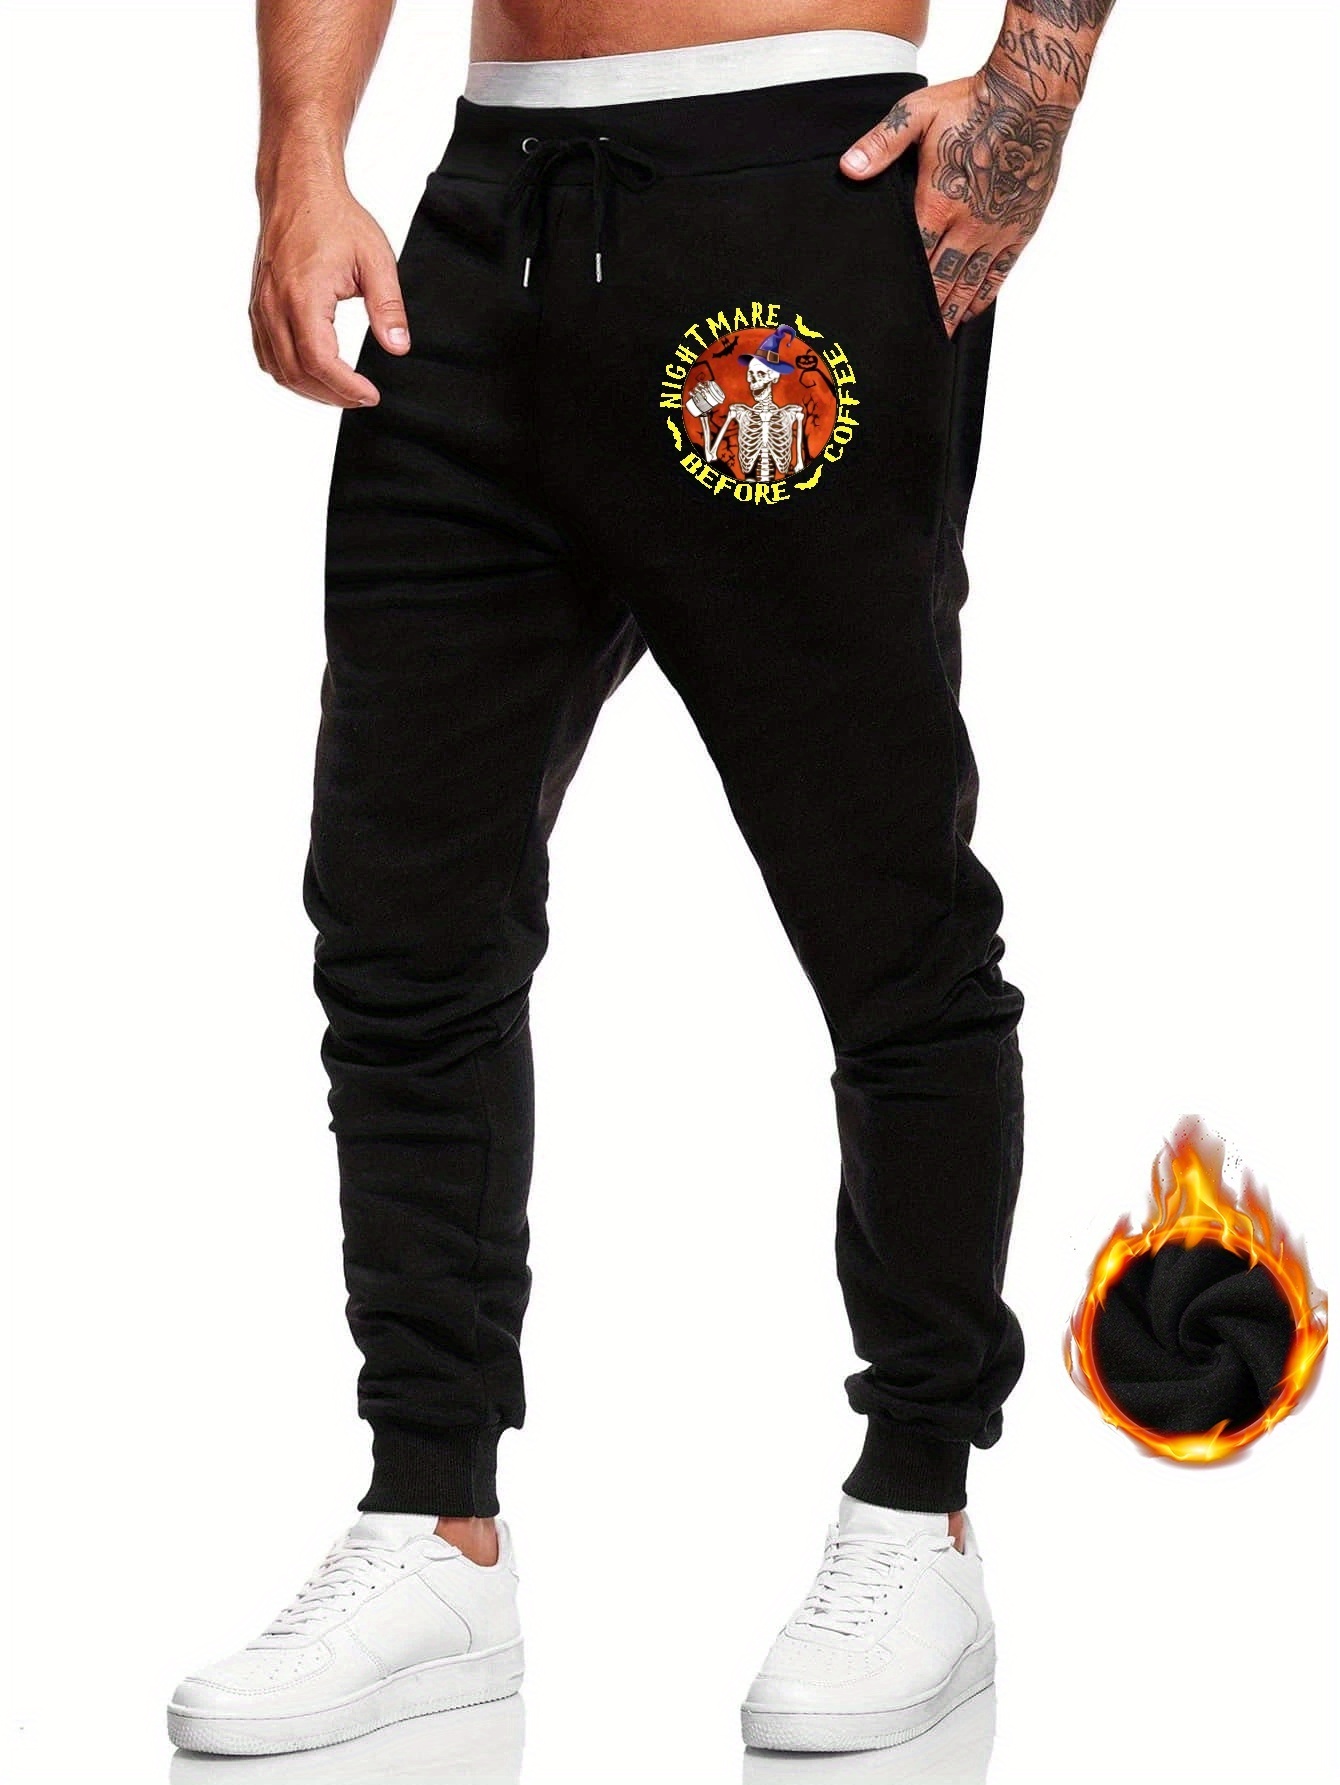 Day of The Dead Sugar Skull Sweatpants for Men Yoga Athletic Lounge Jersey  Trousers with Pockets